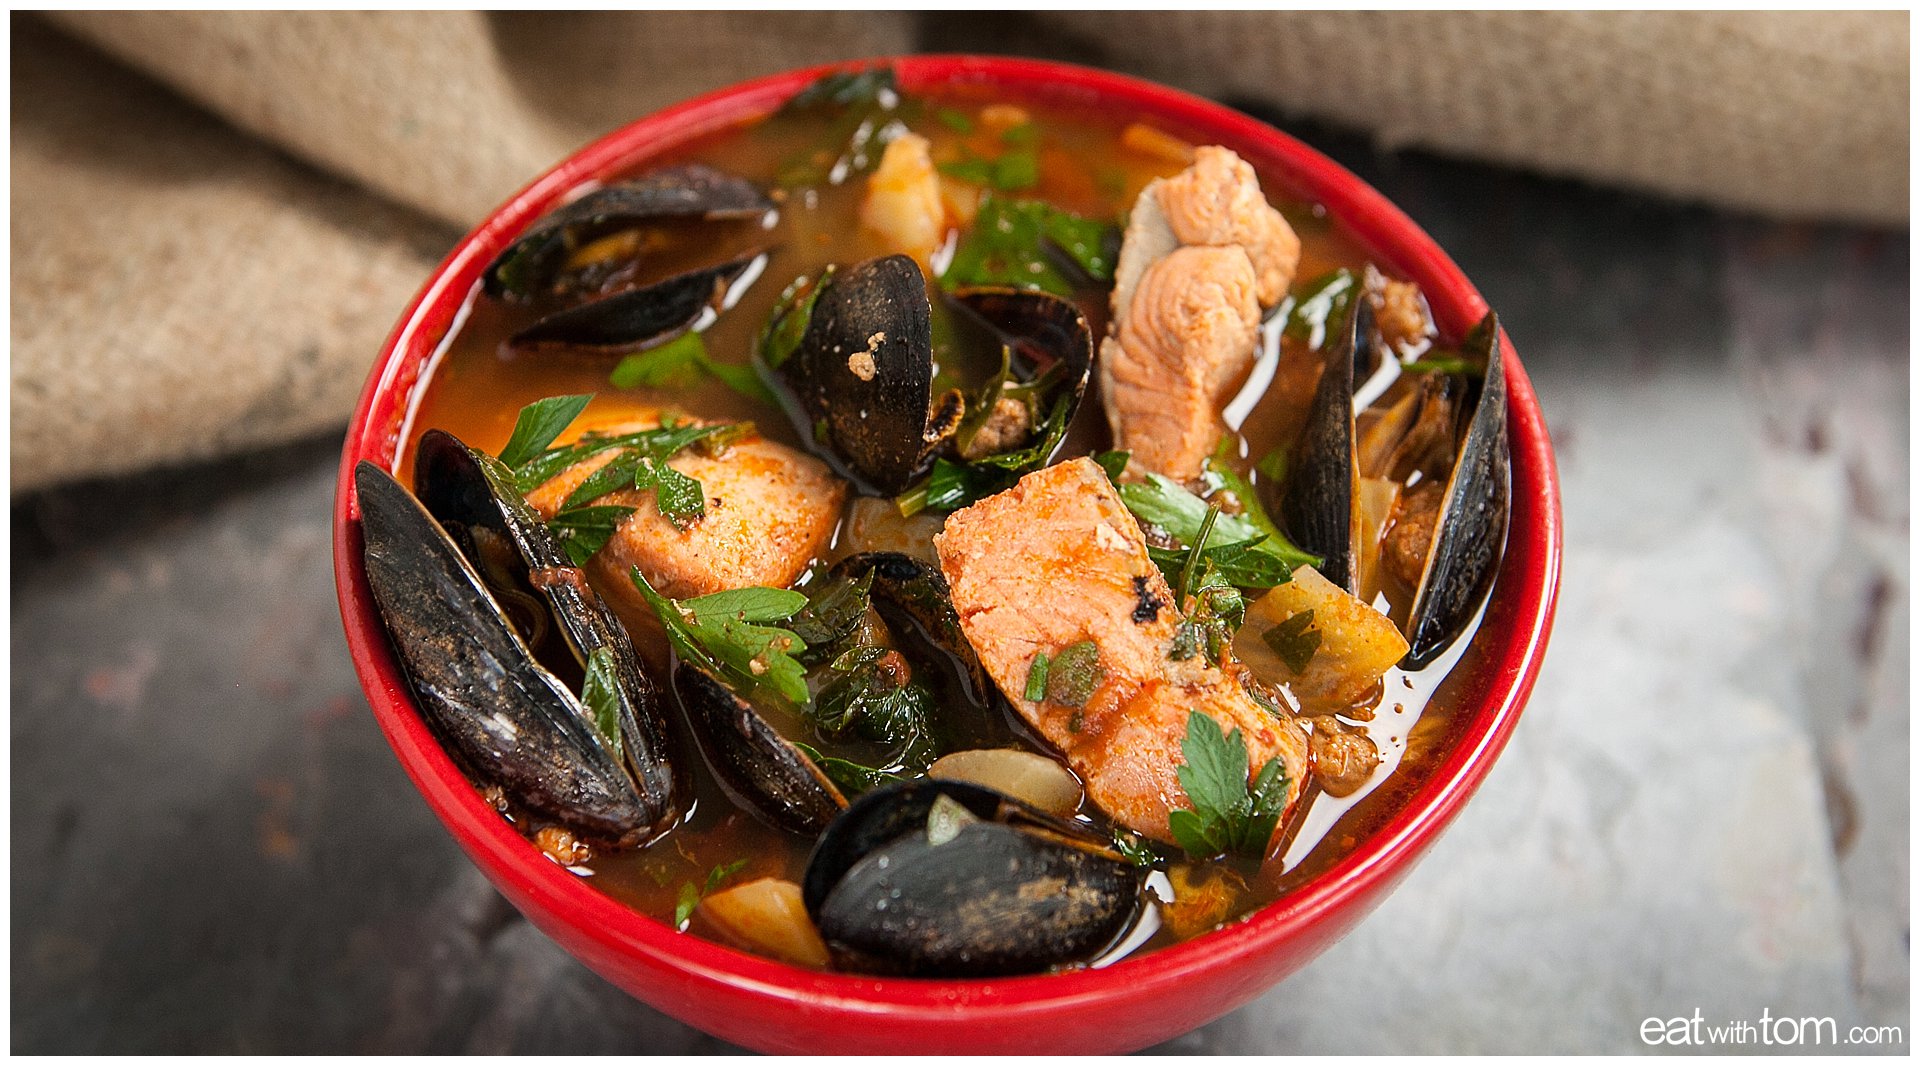 Seafood stew recipe in red bowl with mussels salmon and cilantro - tom schmidt photographer